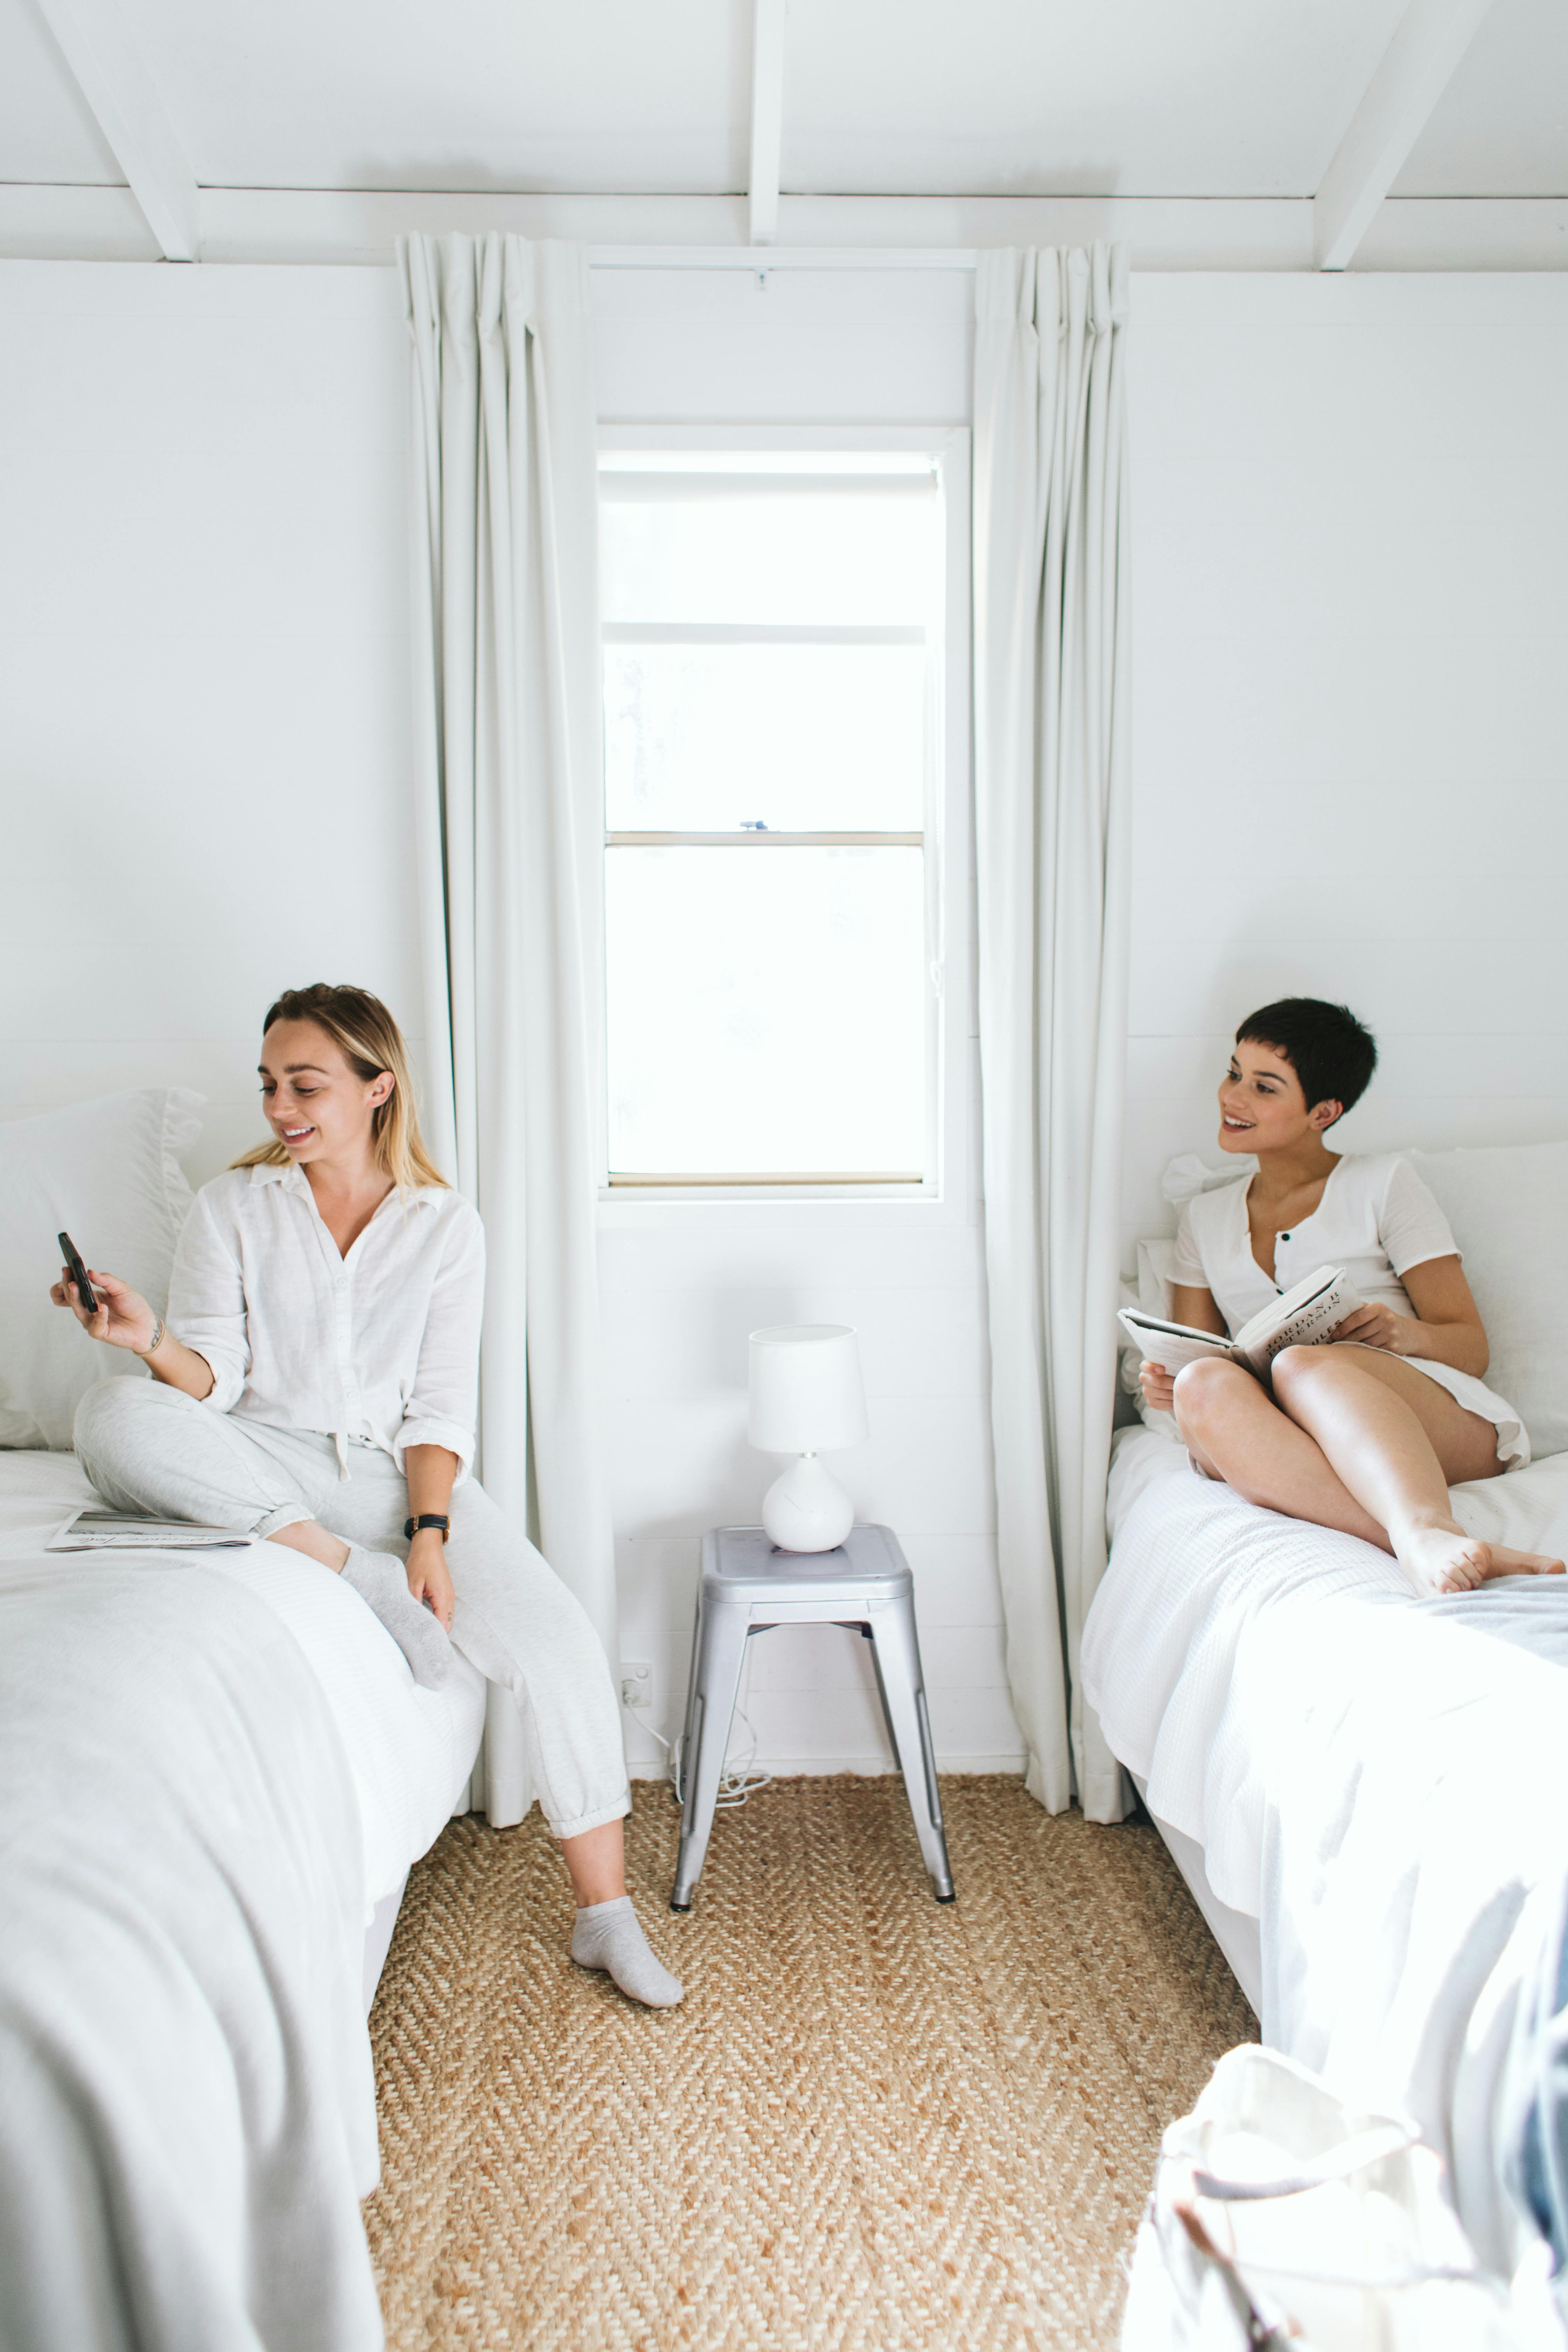 Two women sitting on individual beds | Source: Pexels